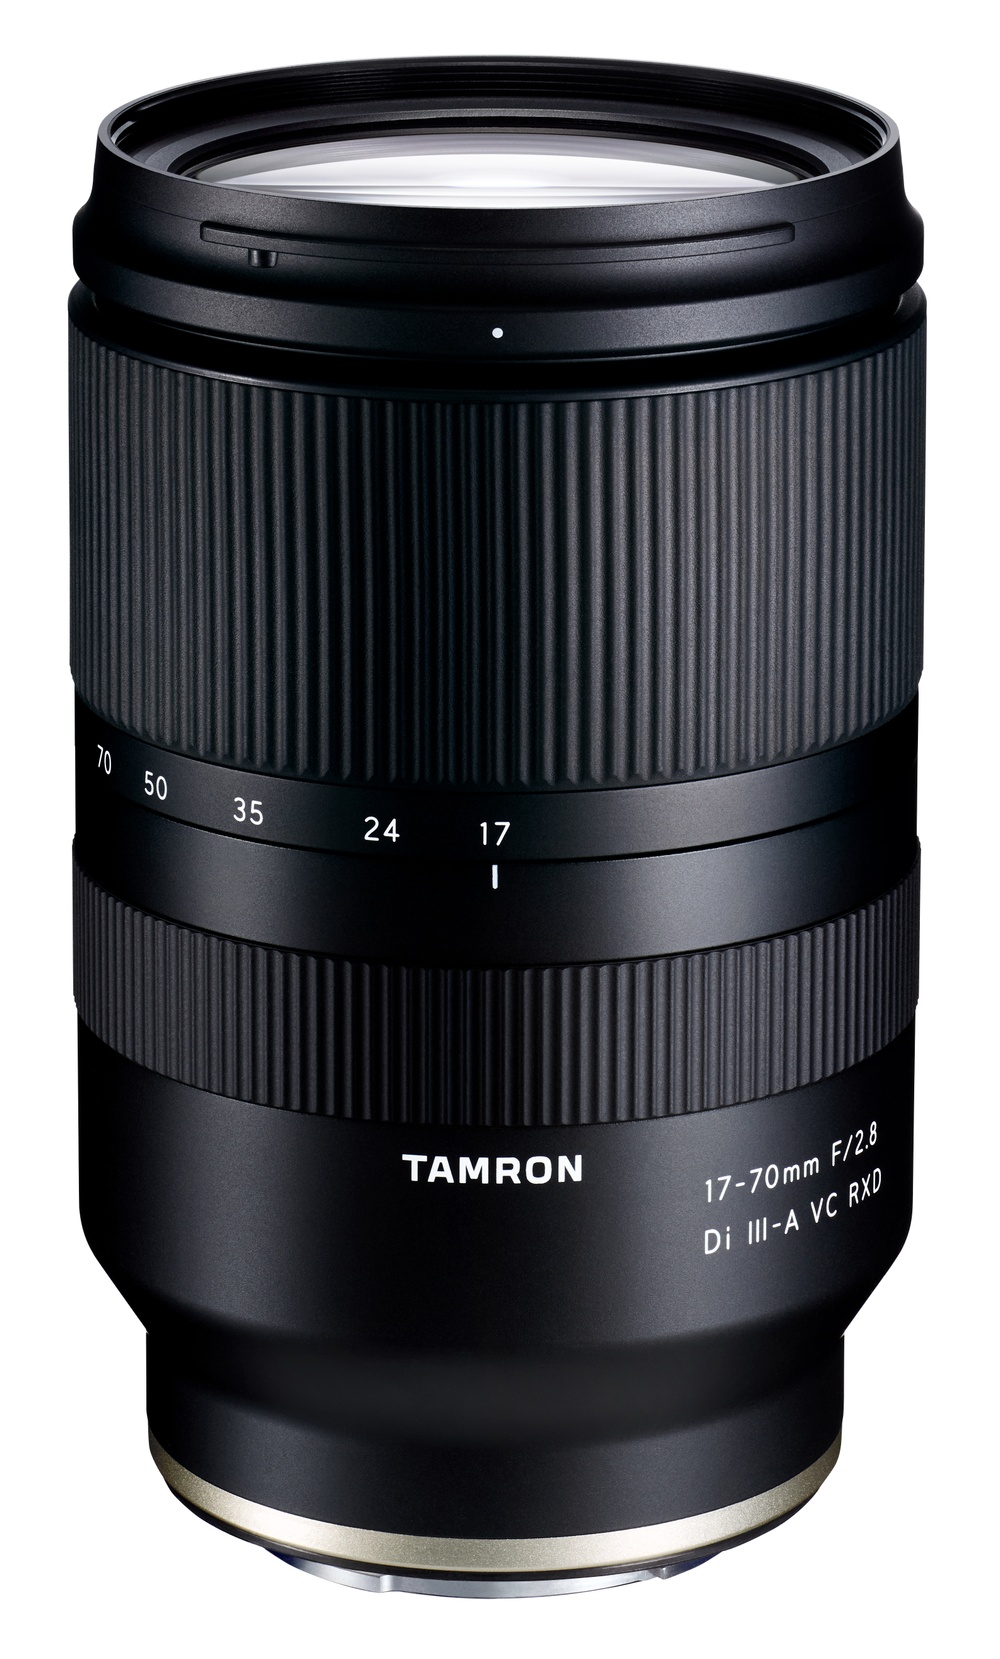 Tamron 17-70mm Sony E APS–cstandard_withback_20201007.jpg